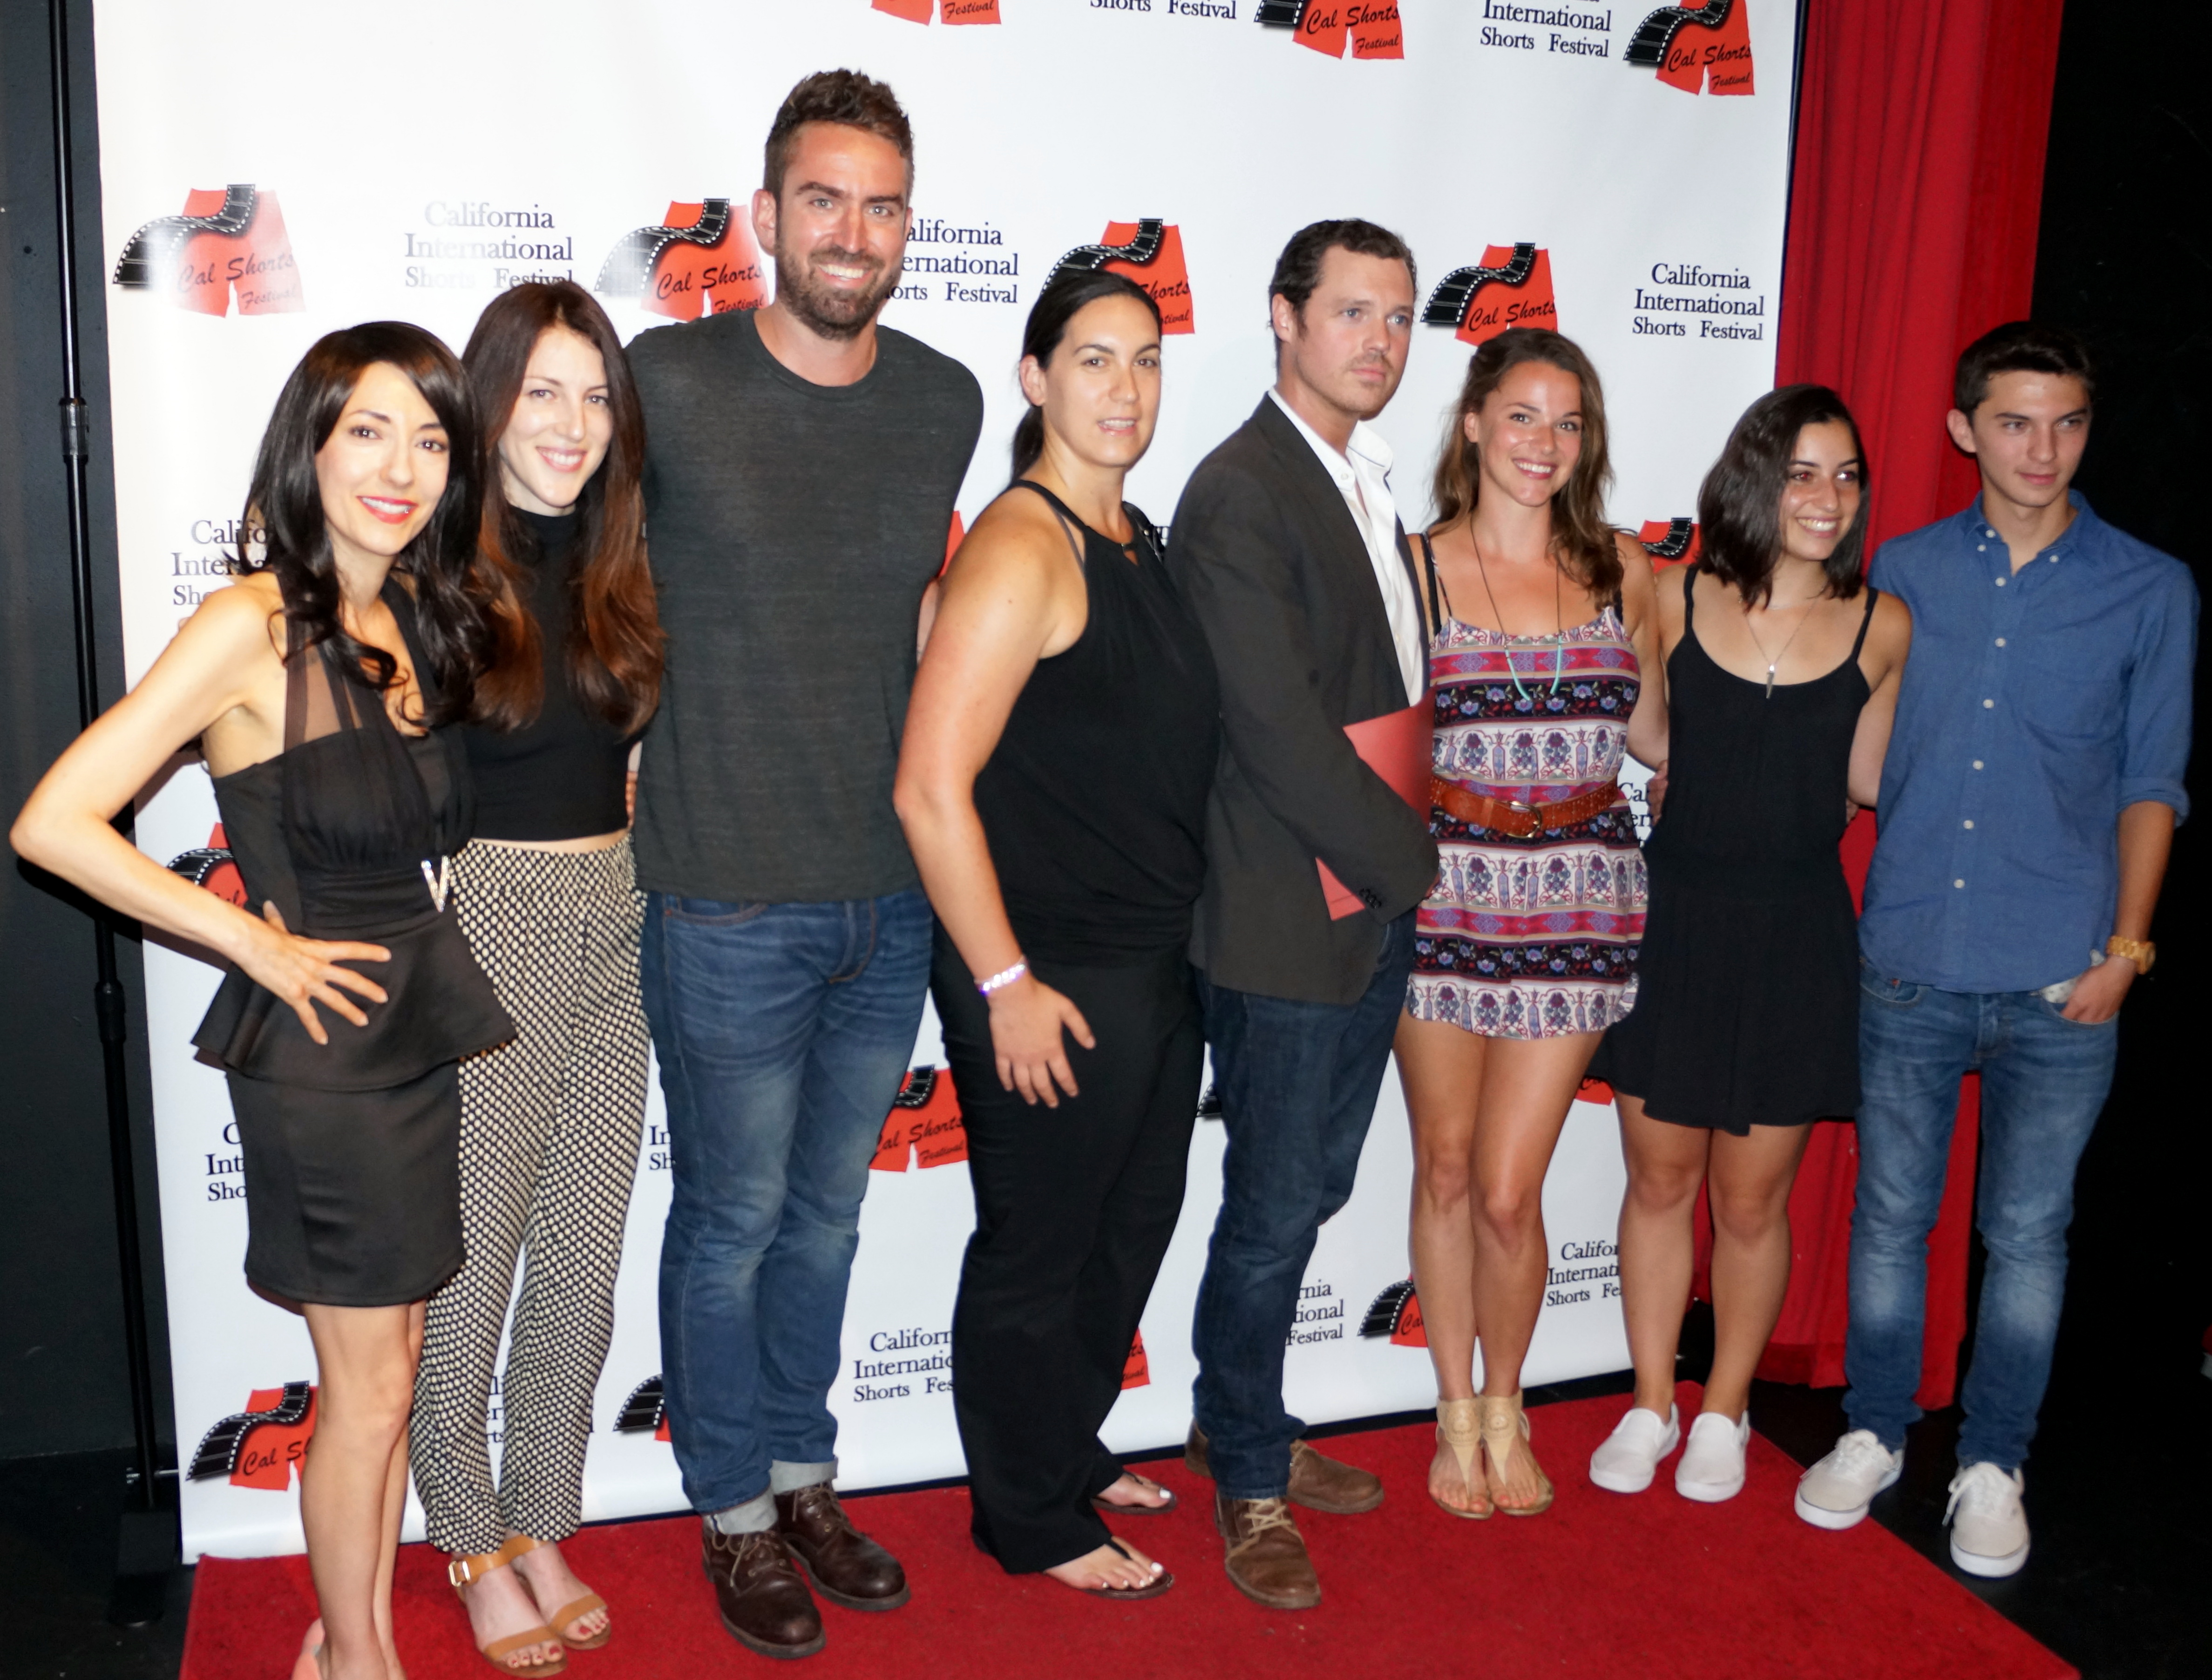 Luciana Lagana at the 2014 California International Shorts Festival screening of her Intimate Temp Agency trailer with Daniella Eisman, Daniel Stine, and other film directors also nominated for best short on 9/13/2014